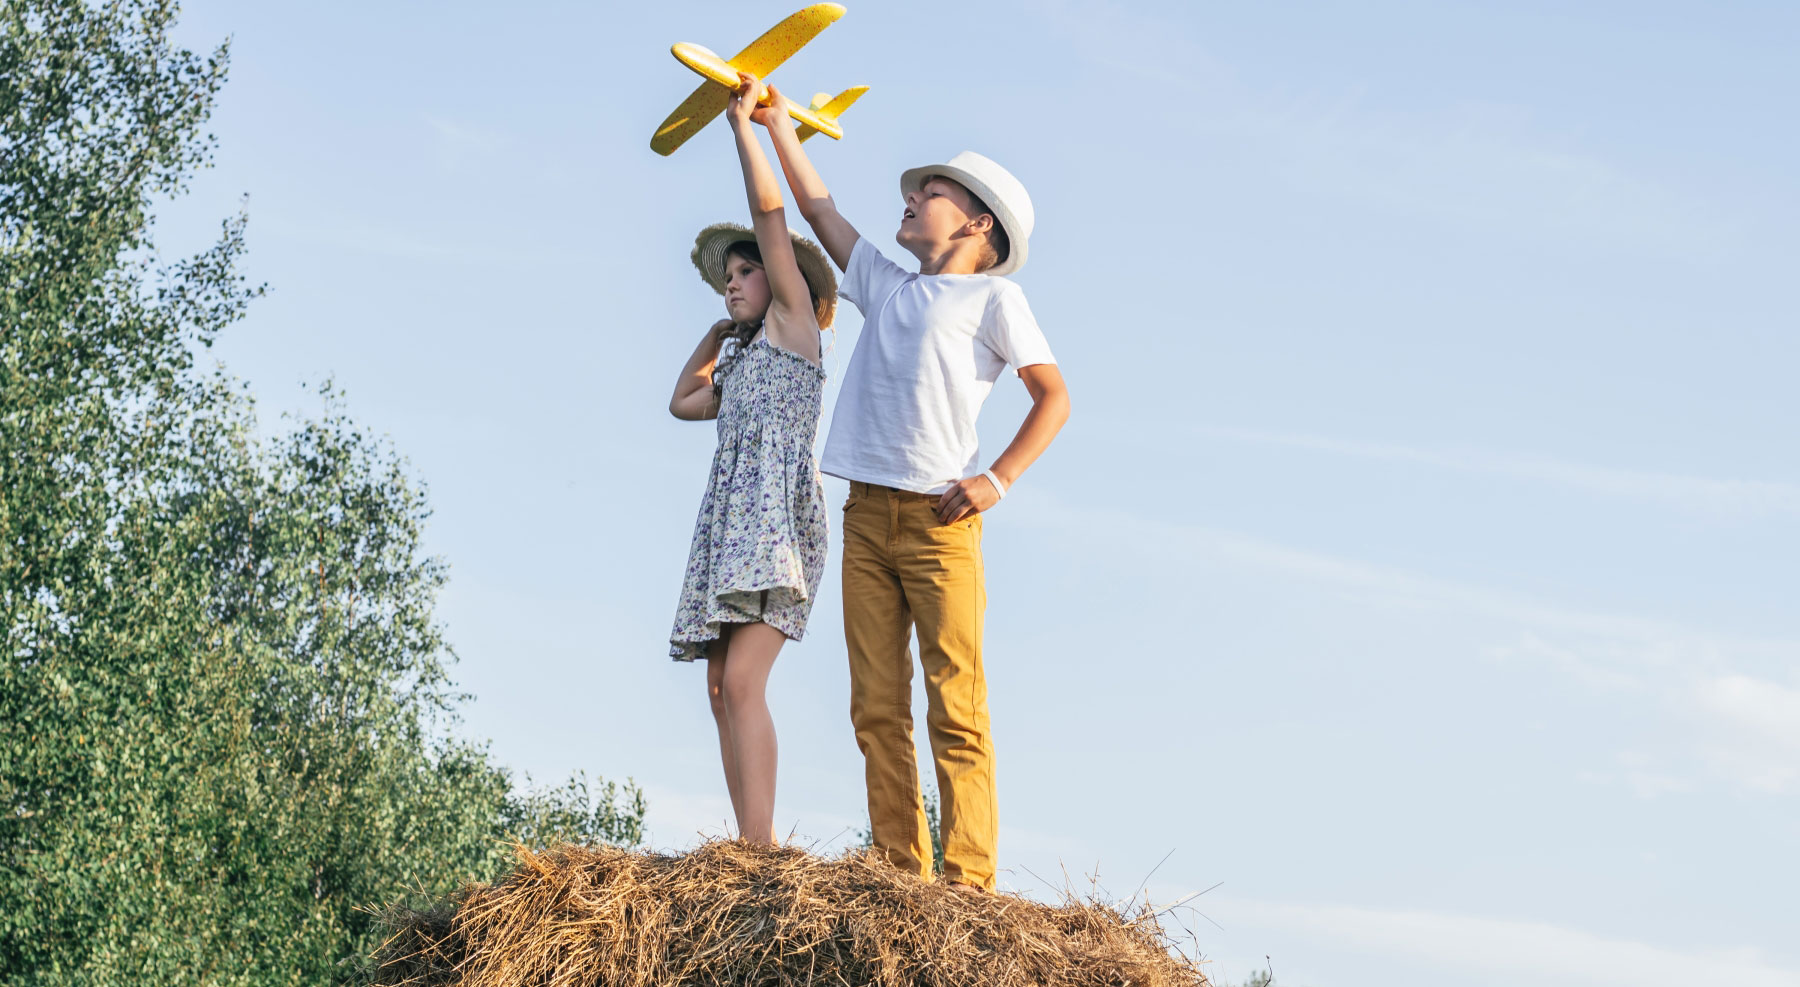 59508839-little-girl-and-boy-together-launch-yellow-toy-airplane.jpg